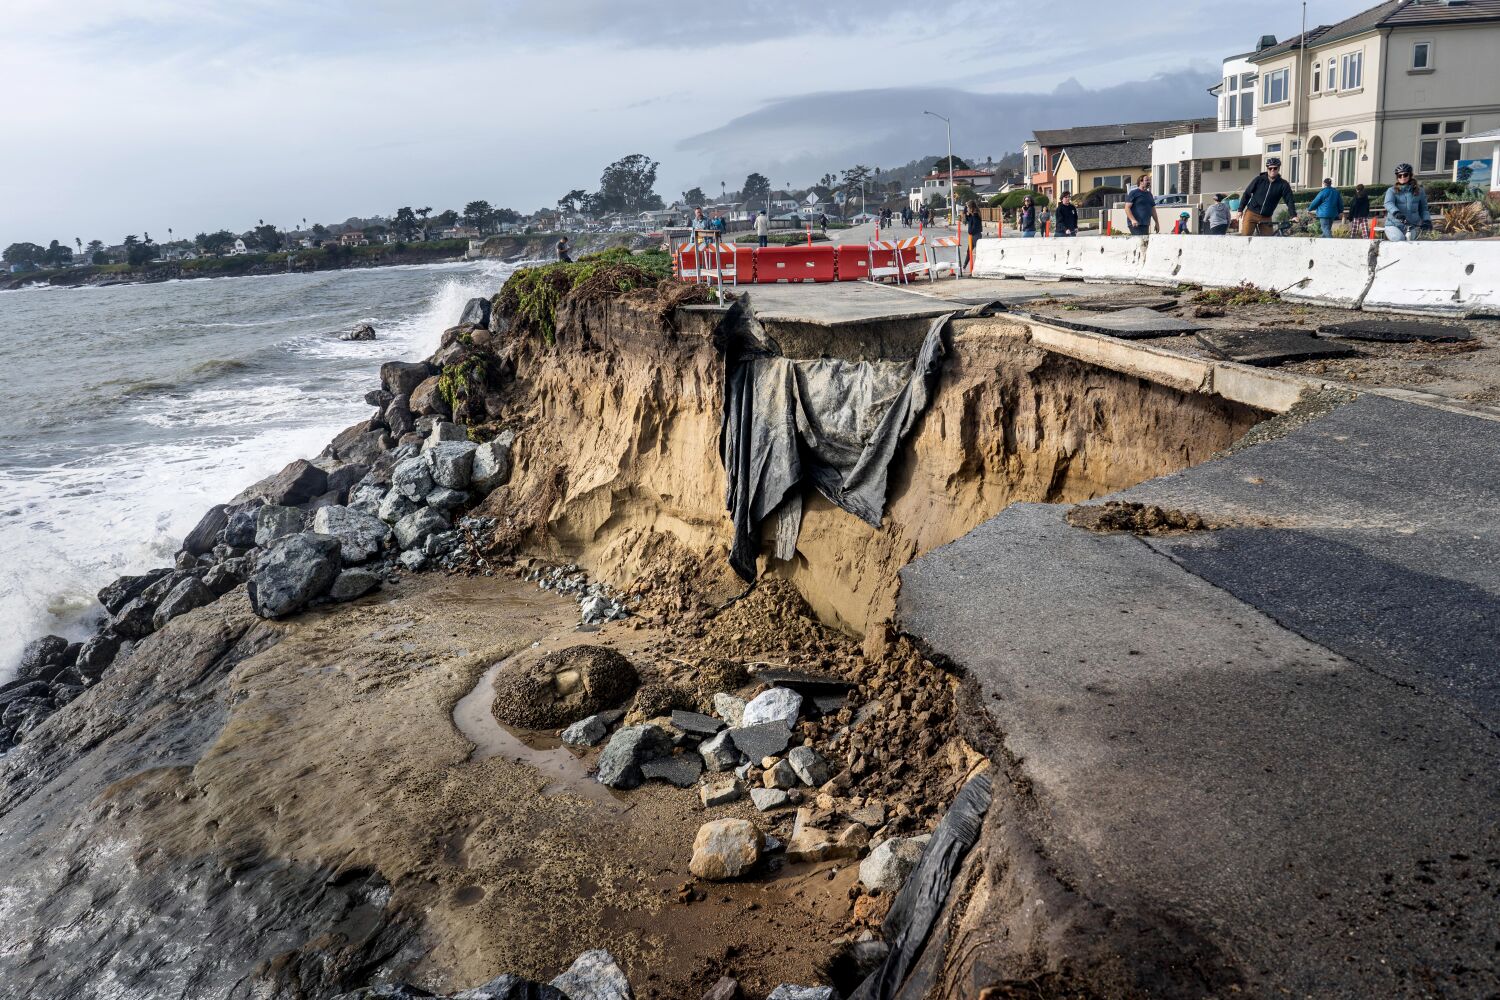 'Life-threatening' flooding feared in Northern California as storms cause rivers to swell